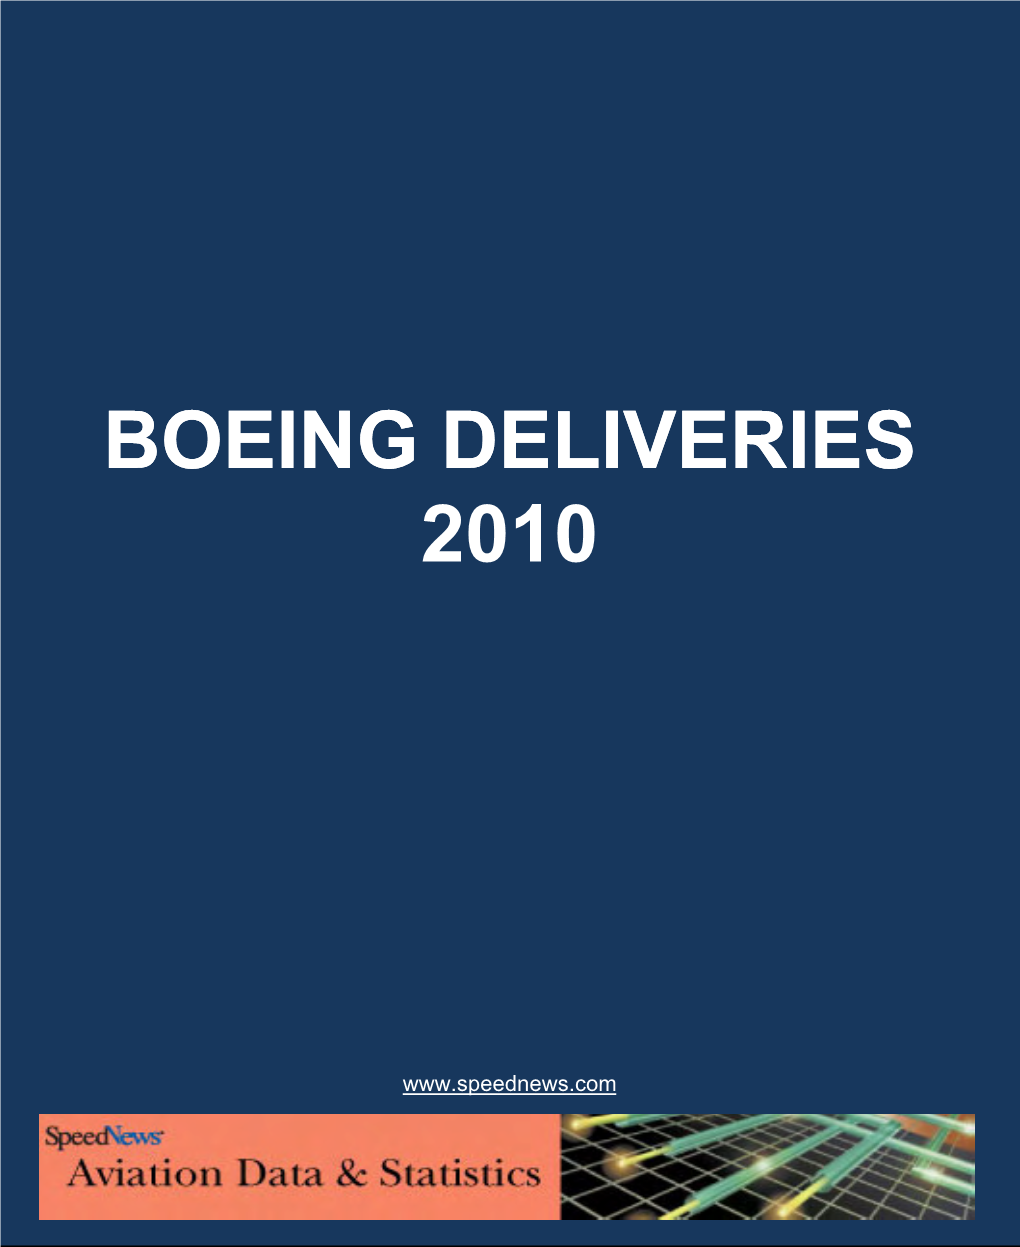 Boeing Deliveries in 2010